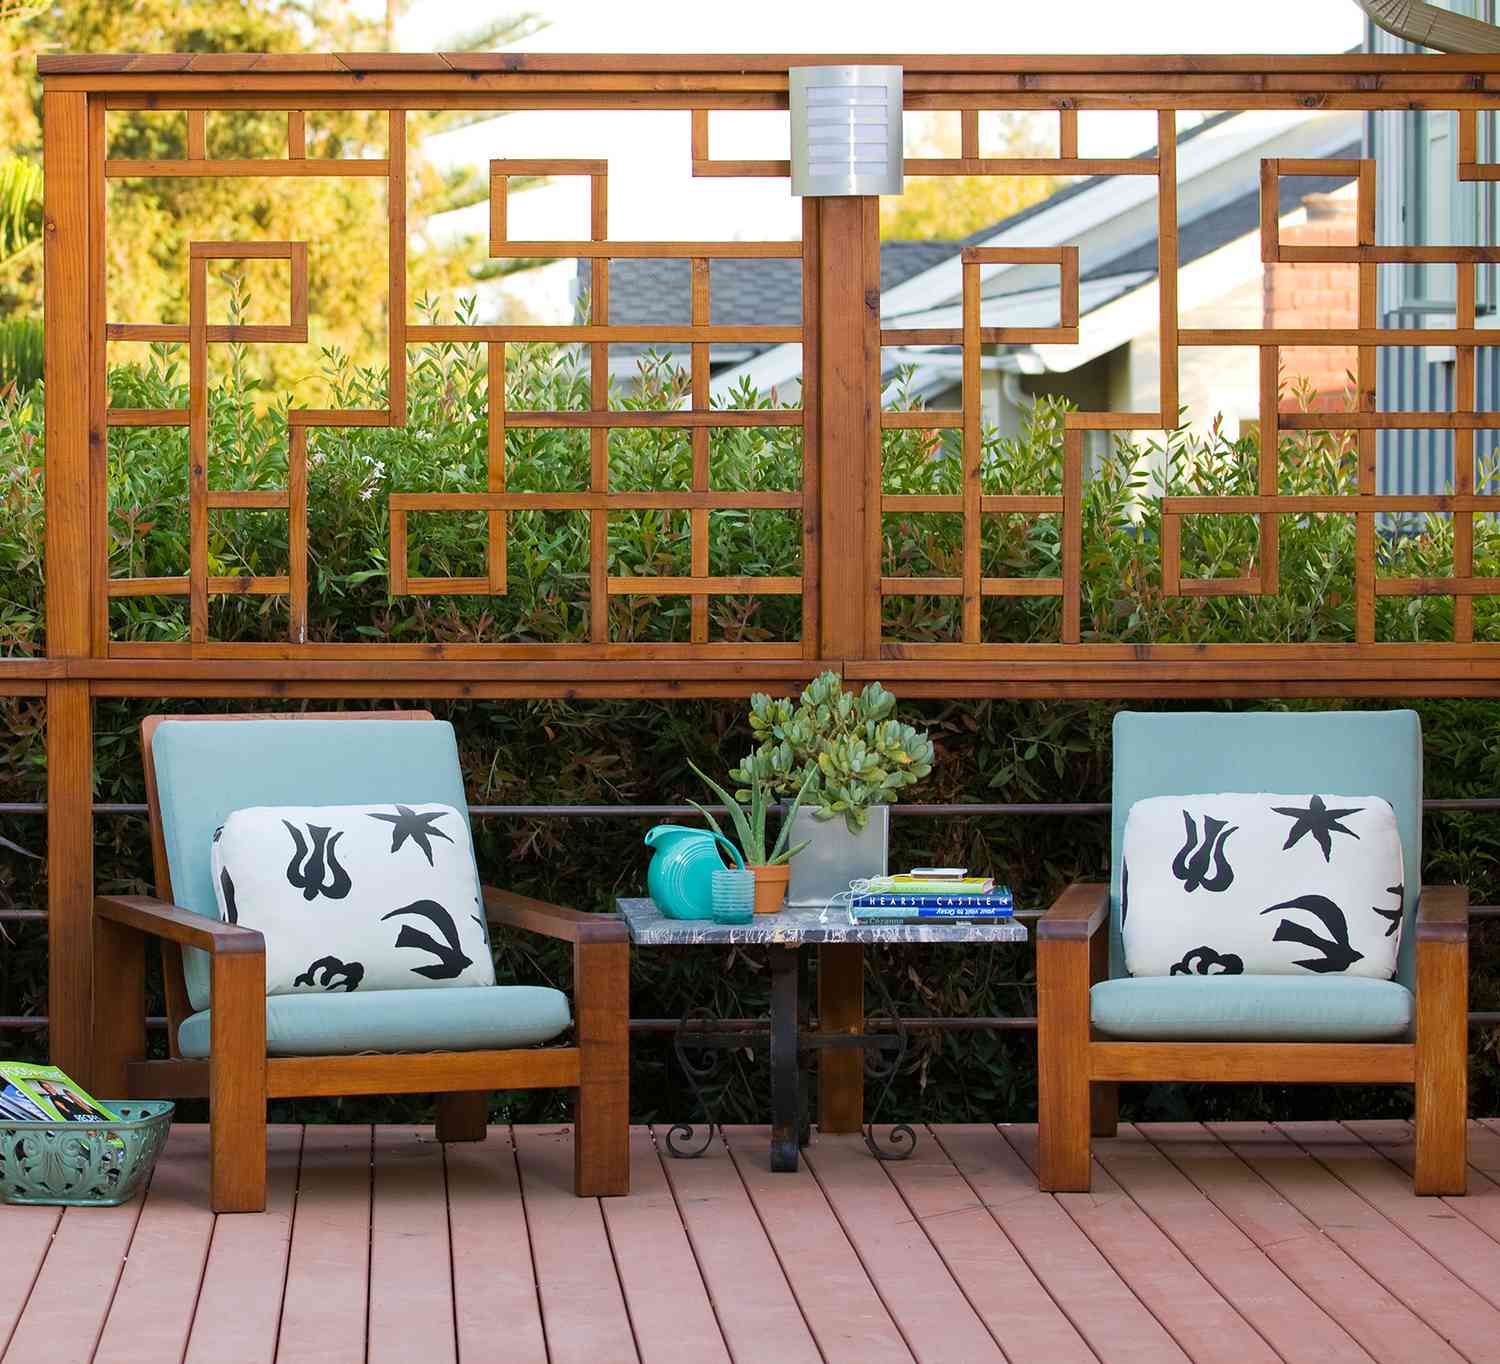 two light-blue cushioned chairs in front of upper railing wood design on deck